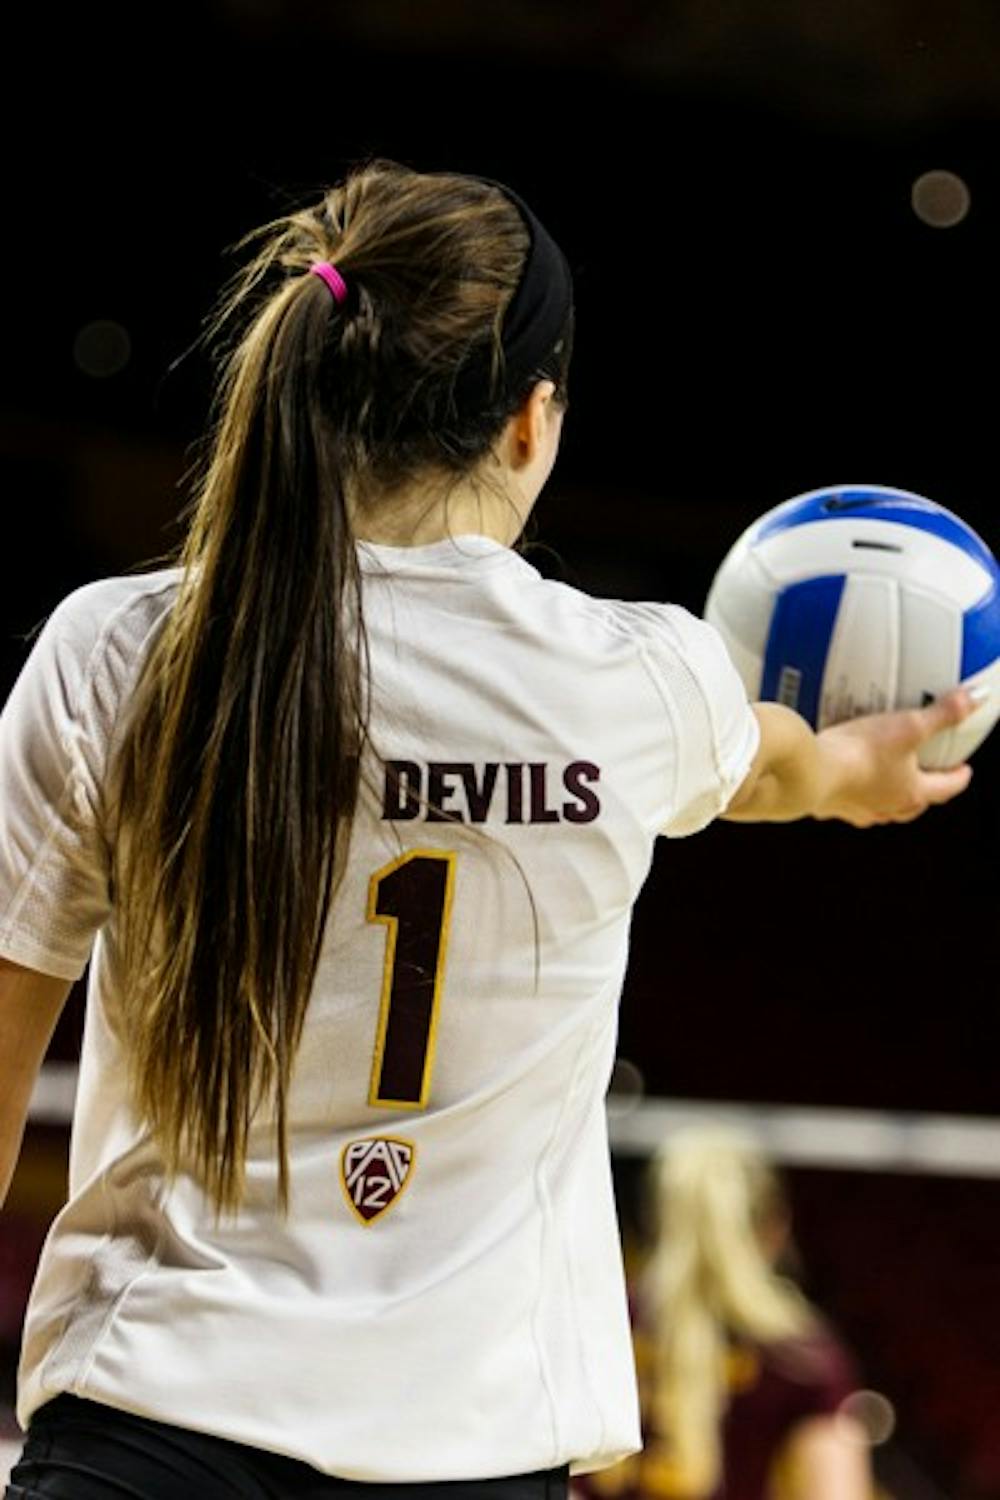 Junior setter Bianca Arellano serves the ball during the ASU vs Colorado volleyball game at the Wells Fargo Arena on Nov. 2, 2014. Arellano has been a key player for the Sun Devils with 17 double doubles this season. (Photo by Daniel Kwon)